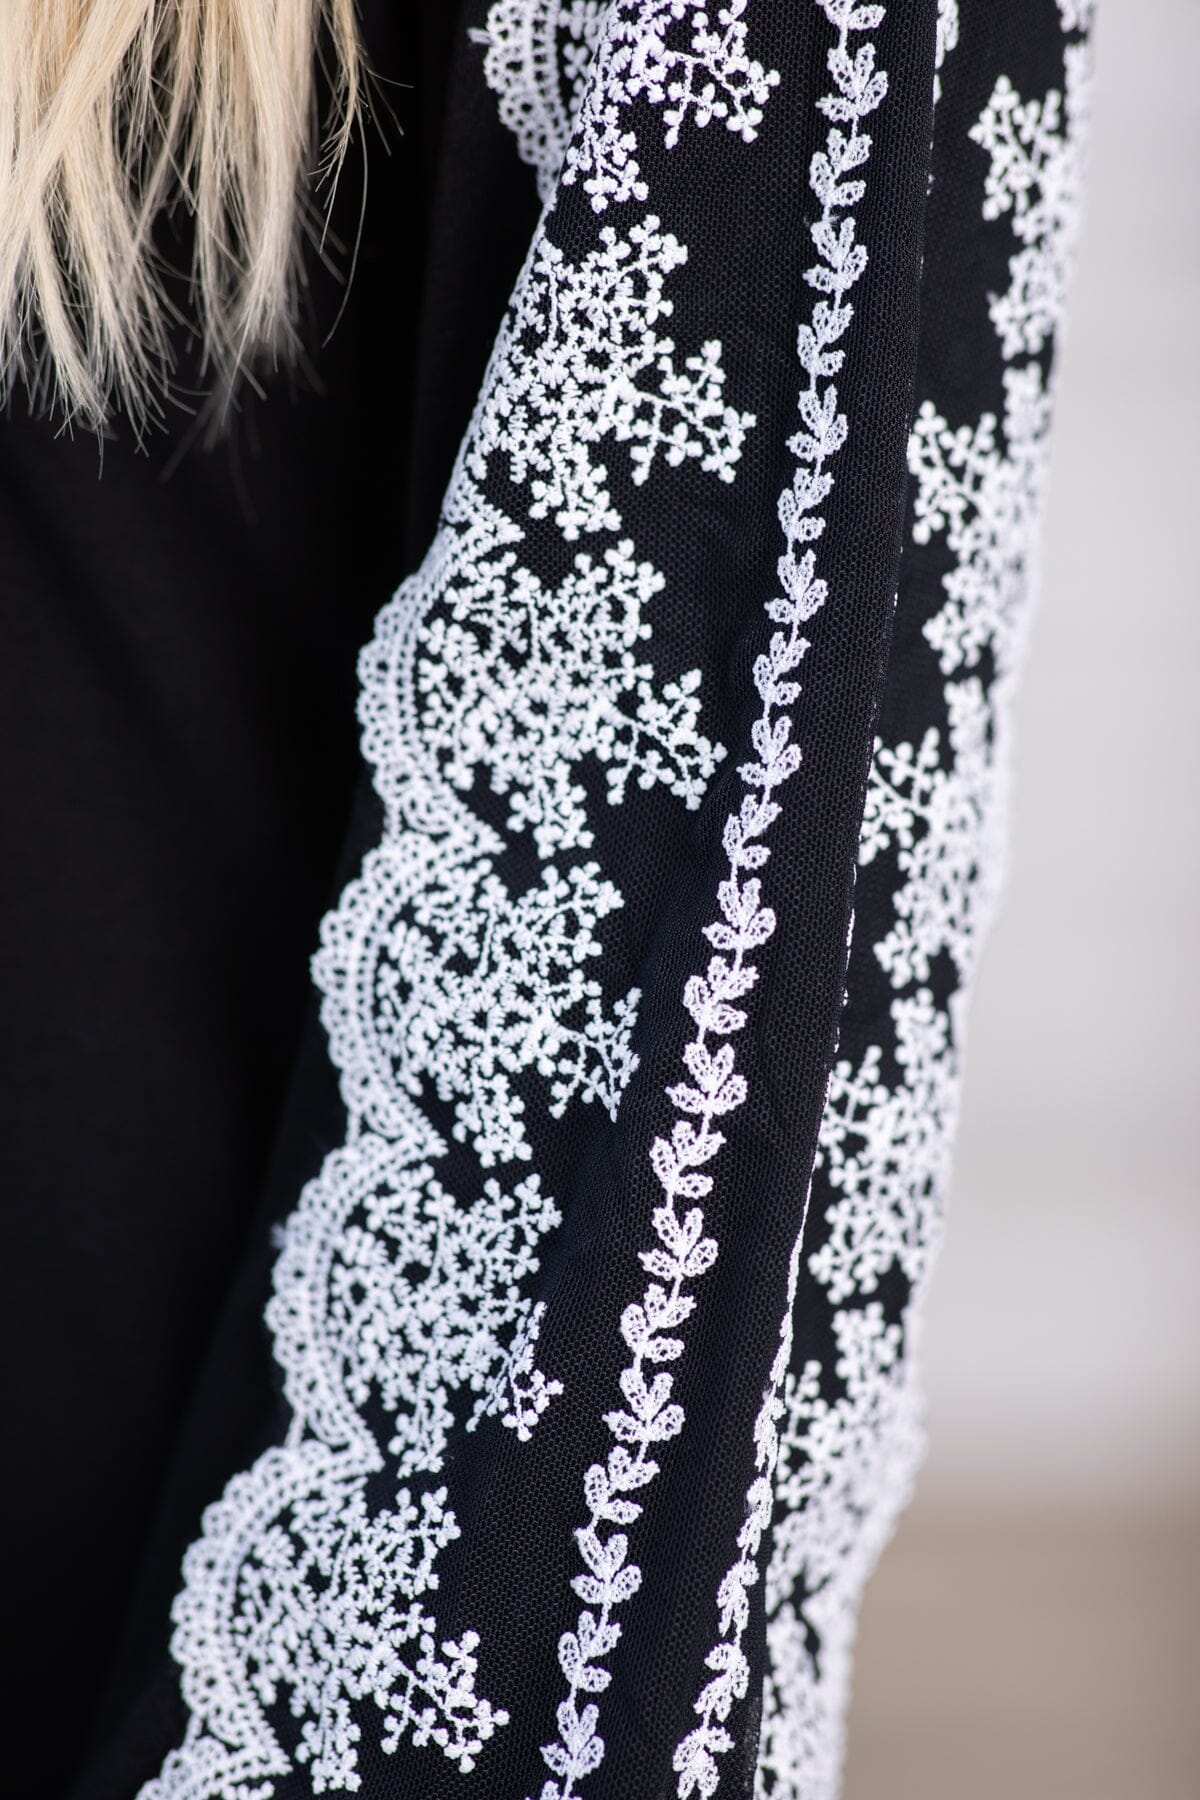 Black and White Lace Sleeve Detail Top - Filly Flair